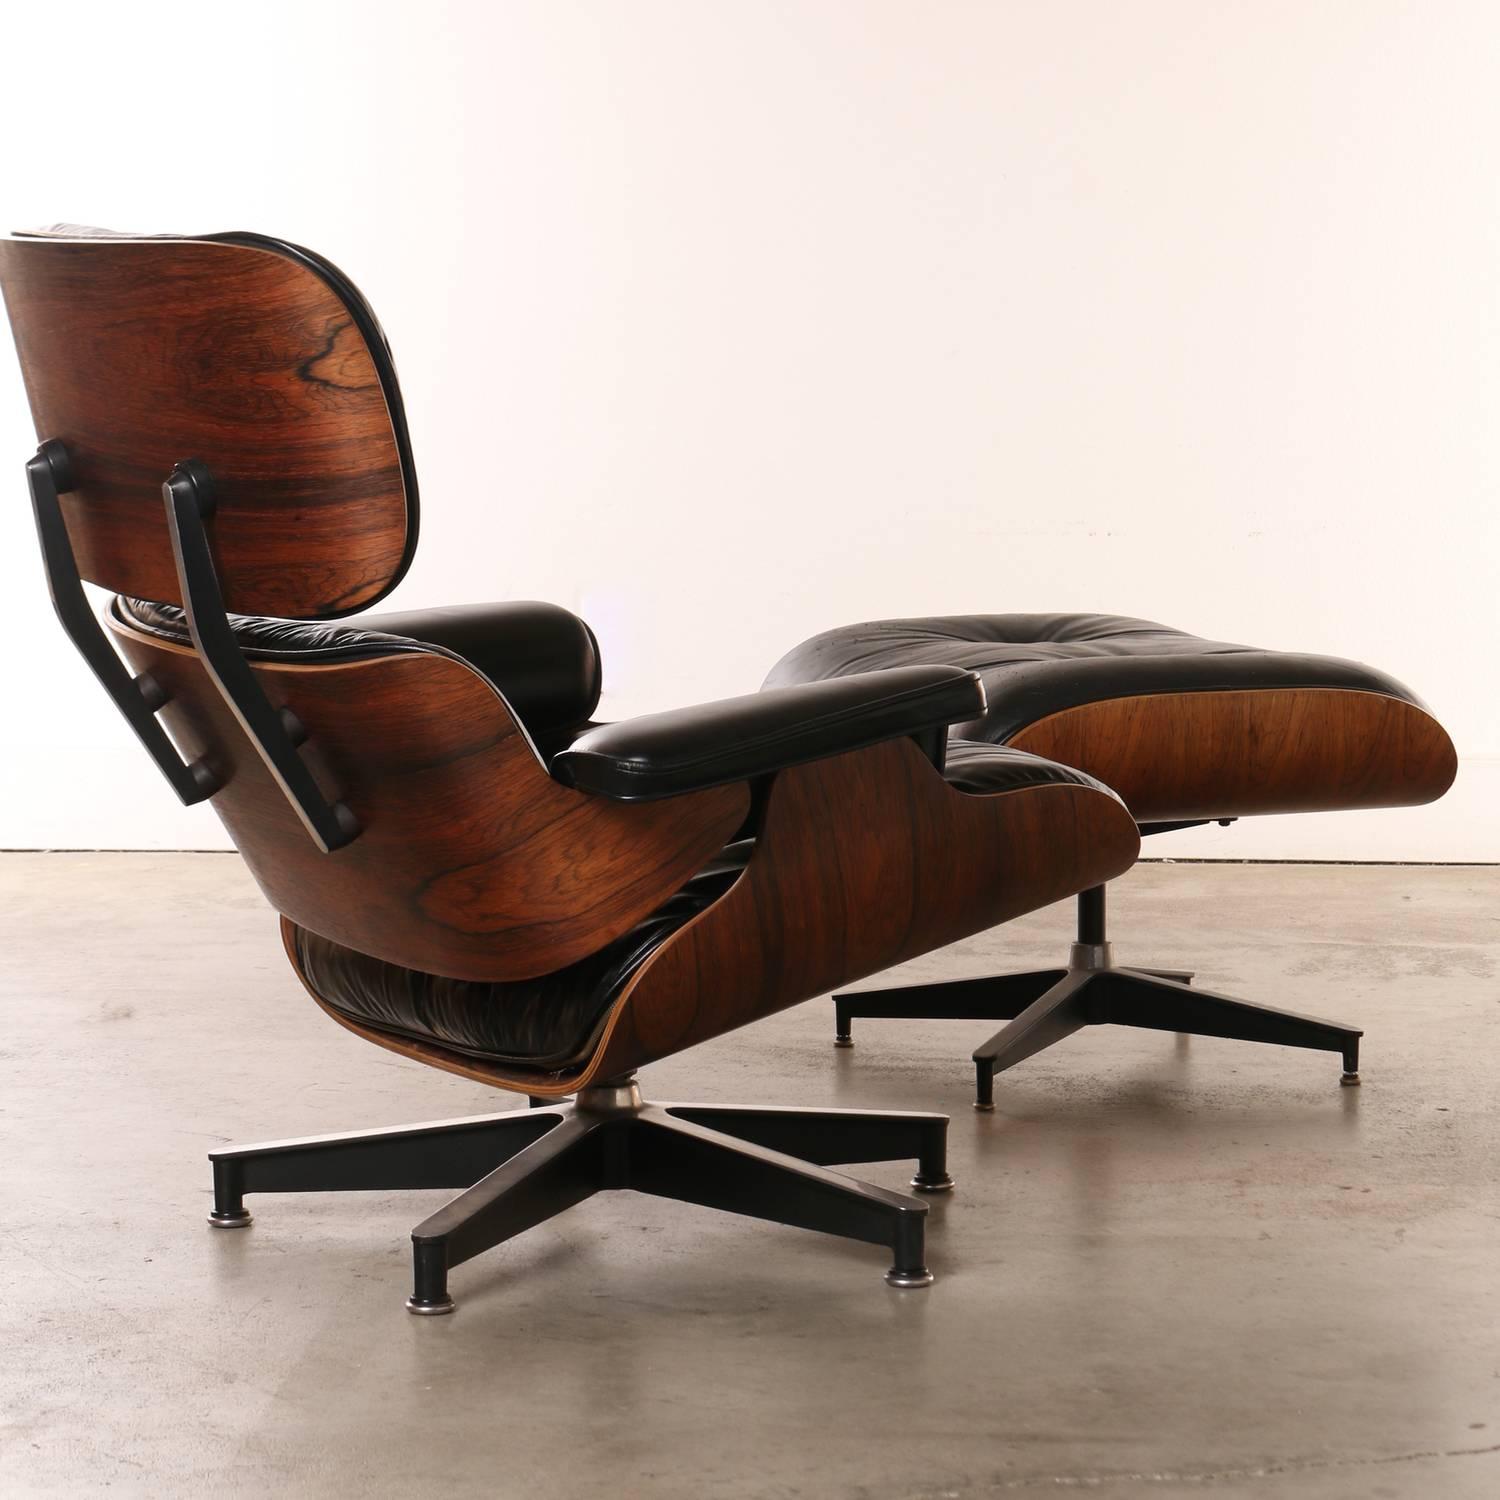 American Eames Rosewood Lounge Chair and Ottoman, Historically Important Venice CA 1960s